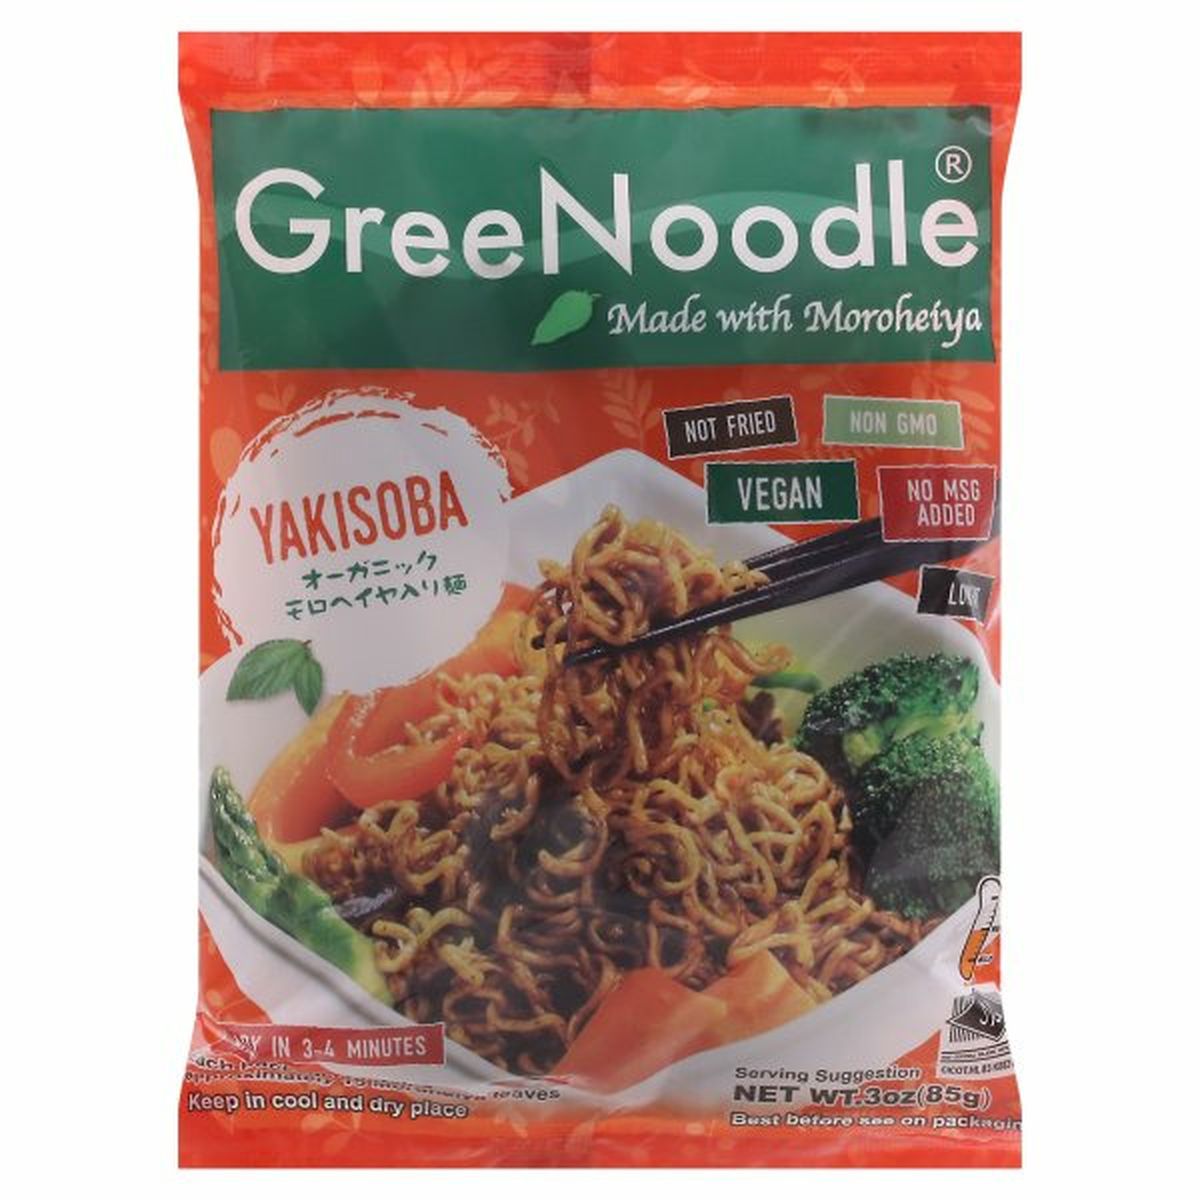 Calories in GreeNoodle Noodles, Yakisoba